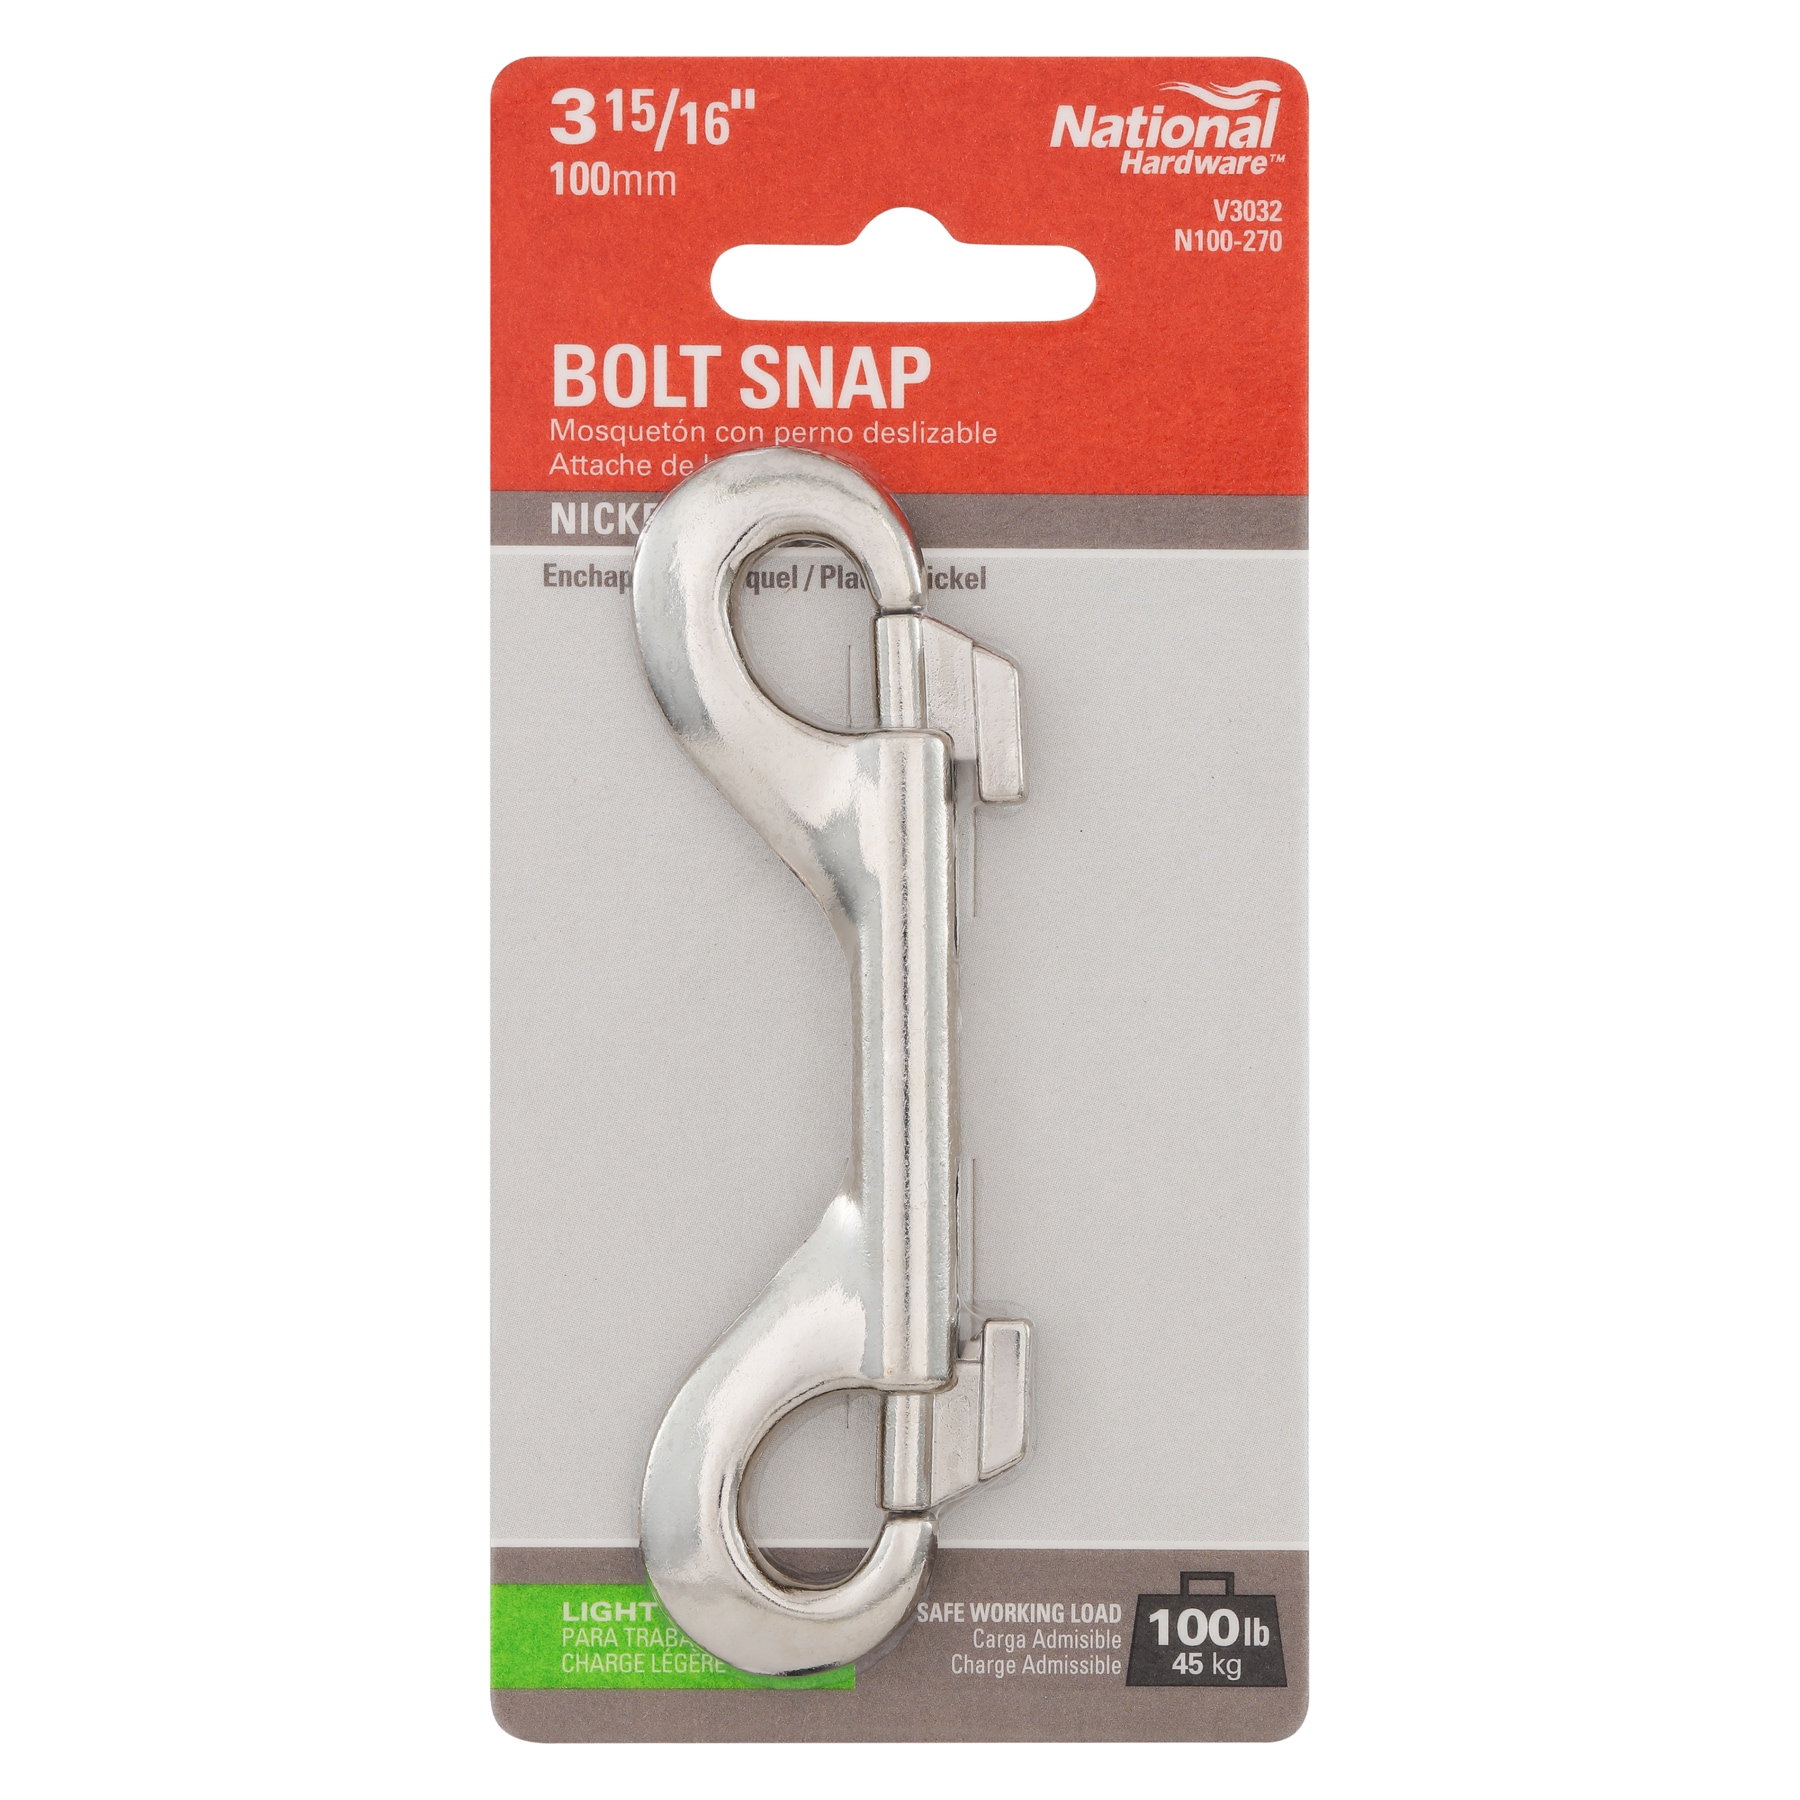 National Hardware N100-270 3-15/16-in Double Bolt Snap in Nickel